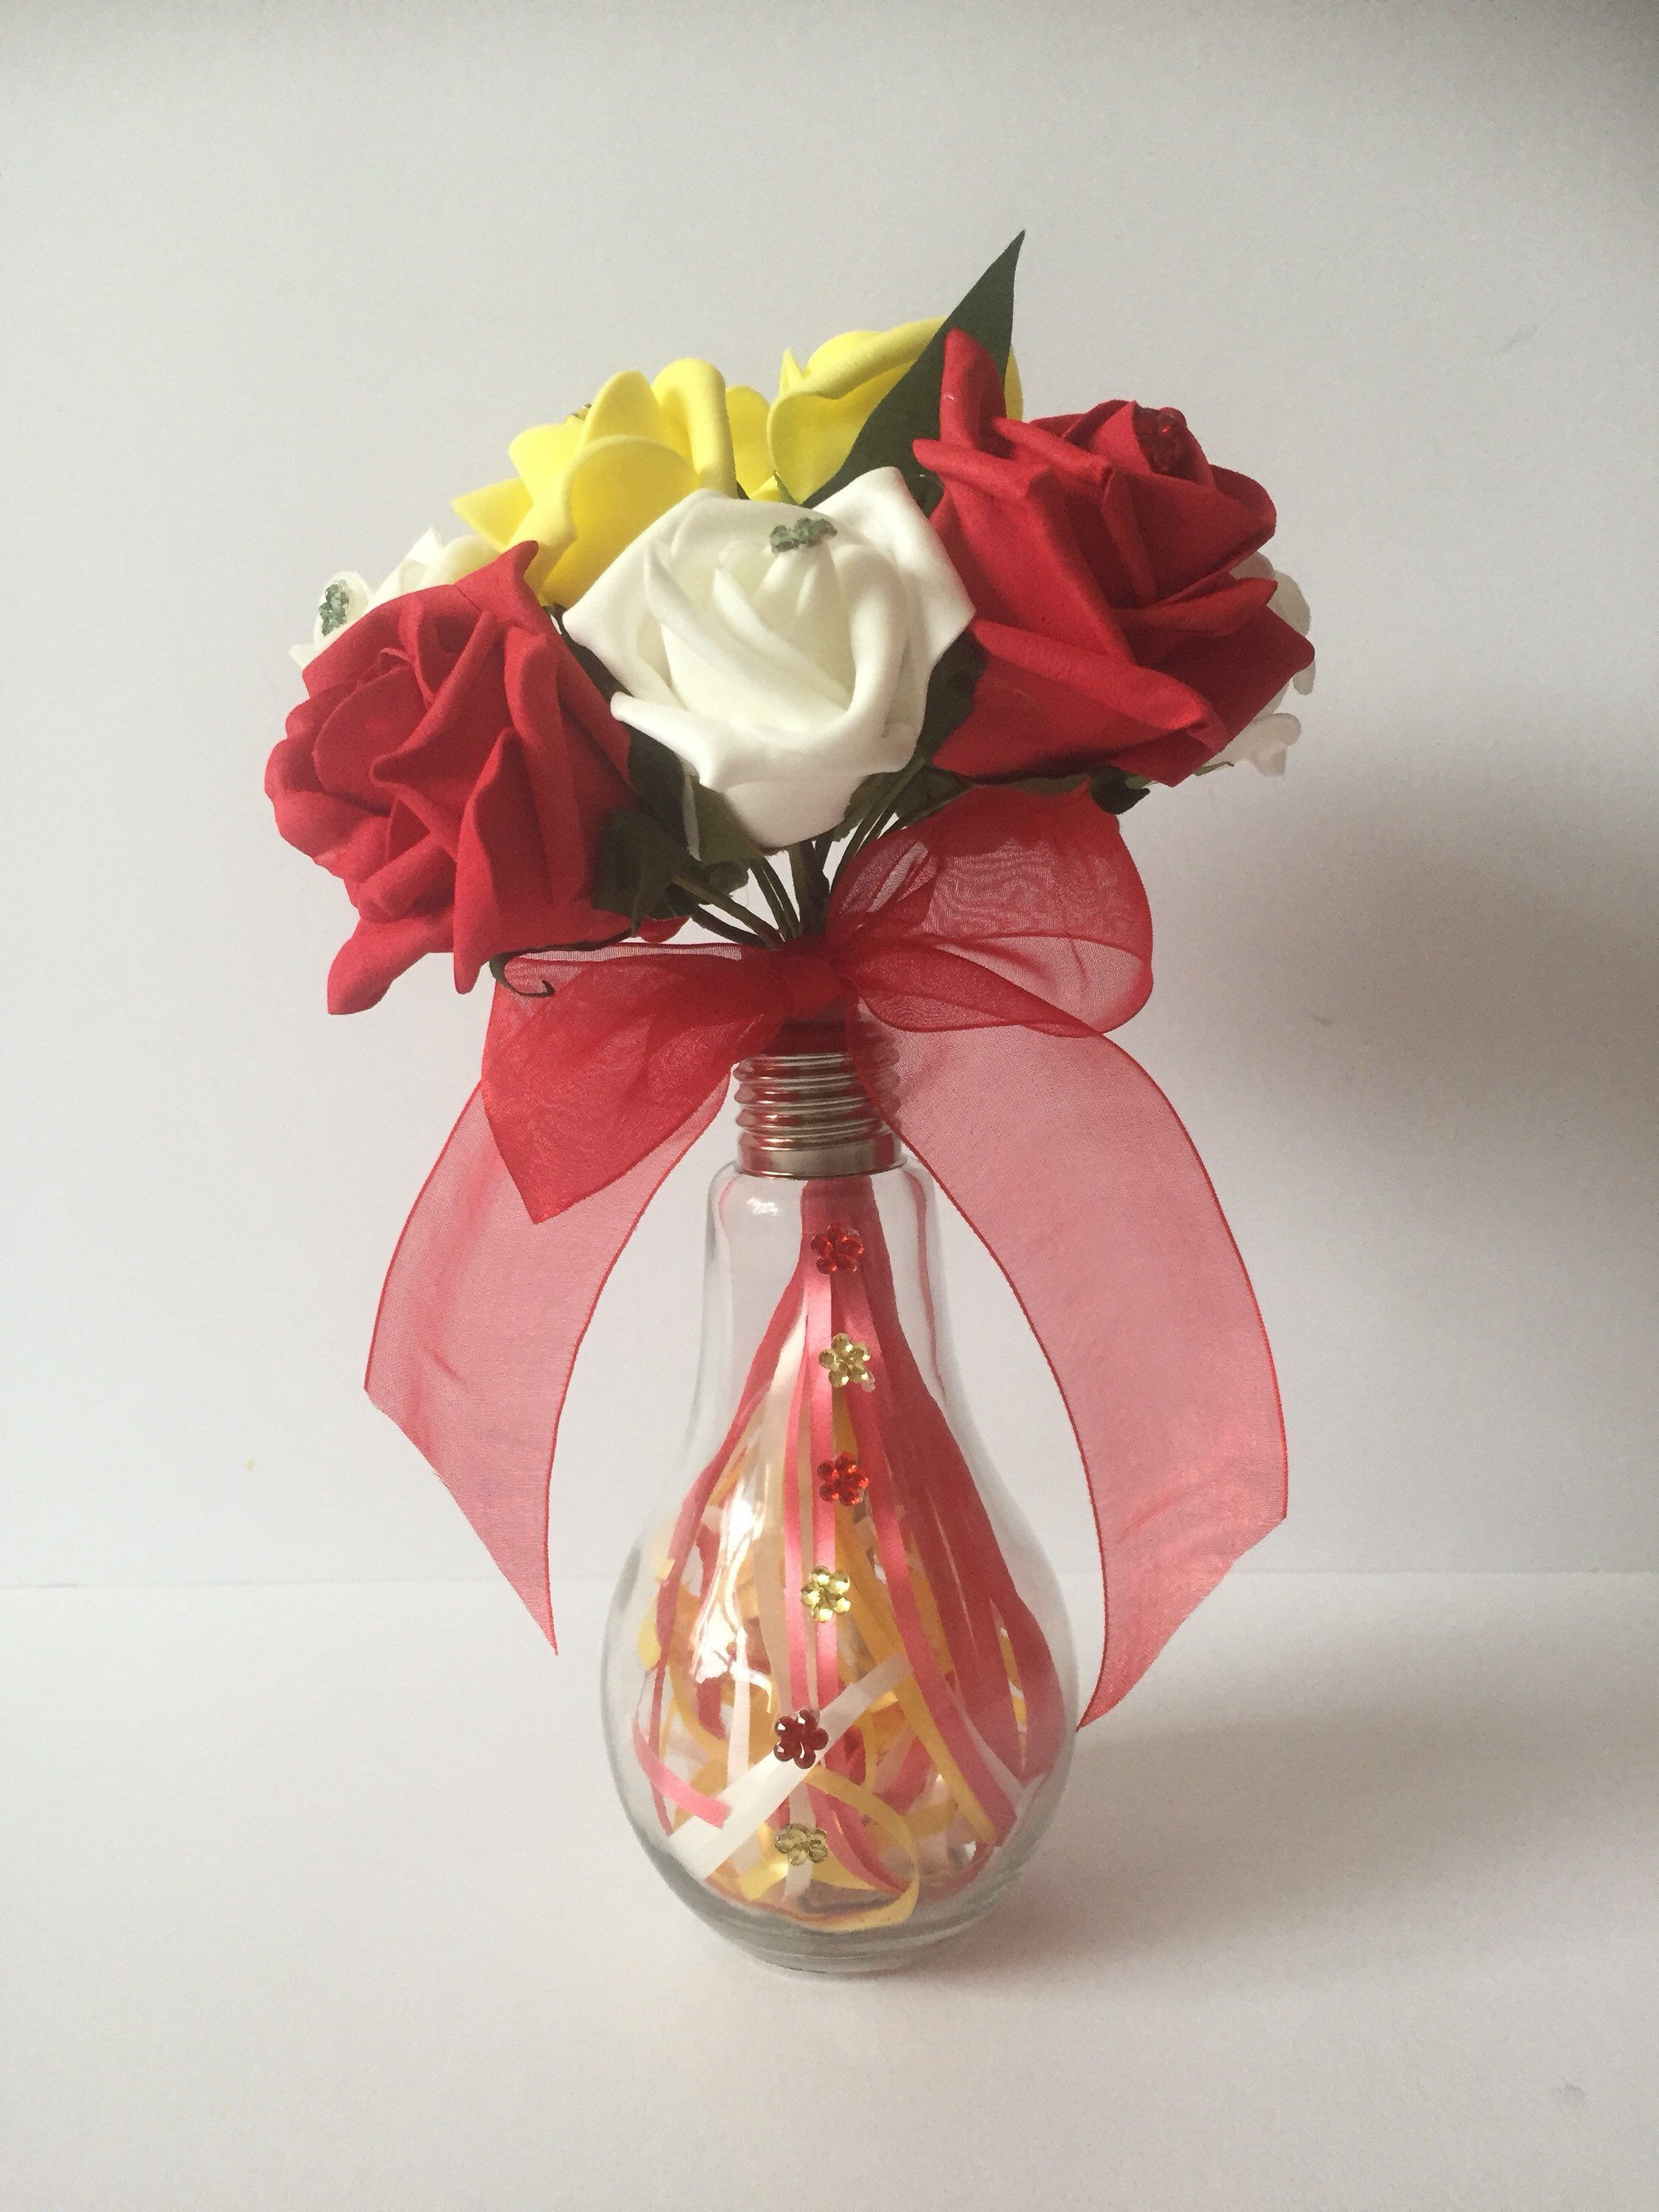 plastic flowers in vase of rose bouquet roses in vase faux flowers flower bouquet home regarding a personal favourite from my etsy shop https www etsy com